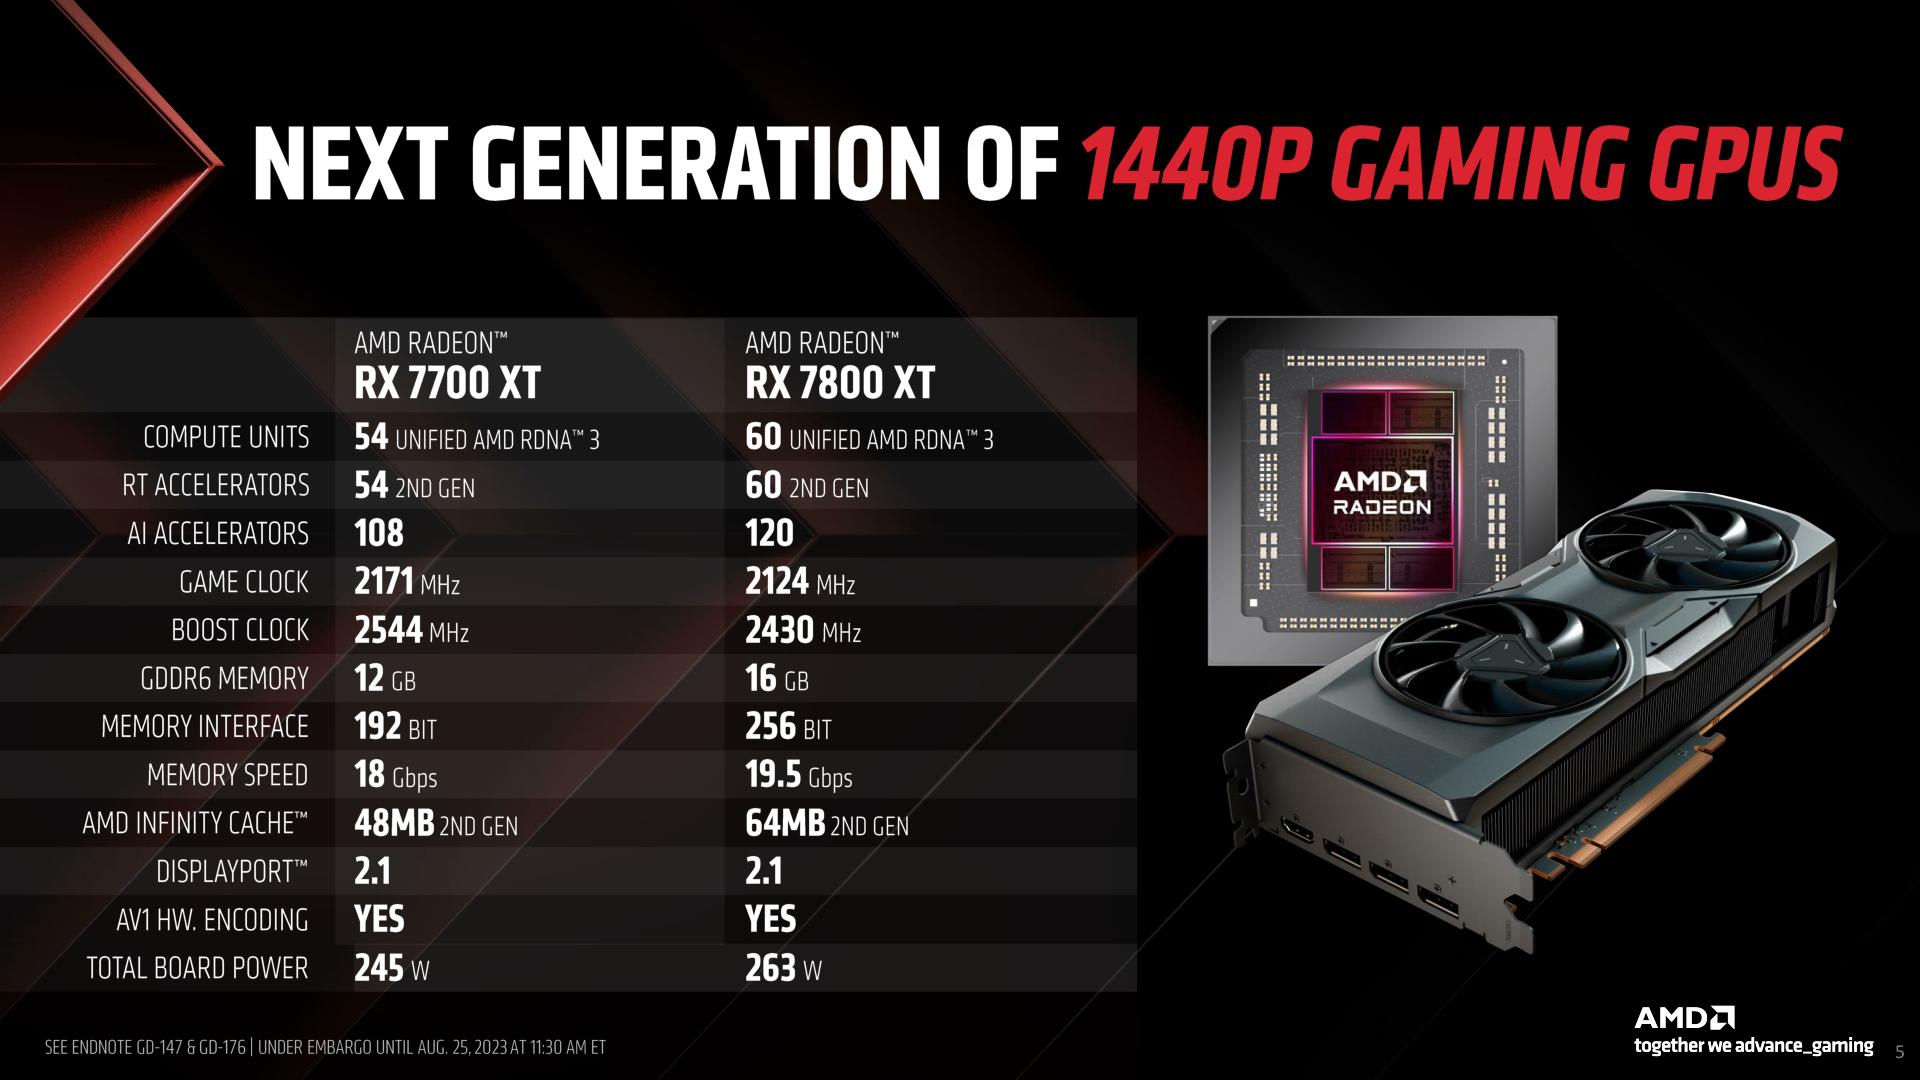 AMD Radeon RX 7800 XT specs, release date, and latest news